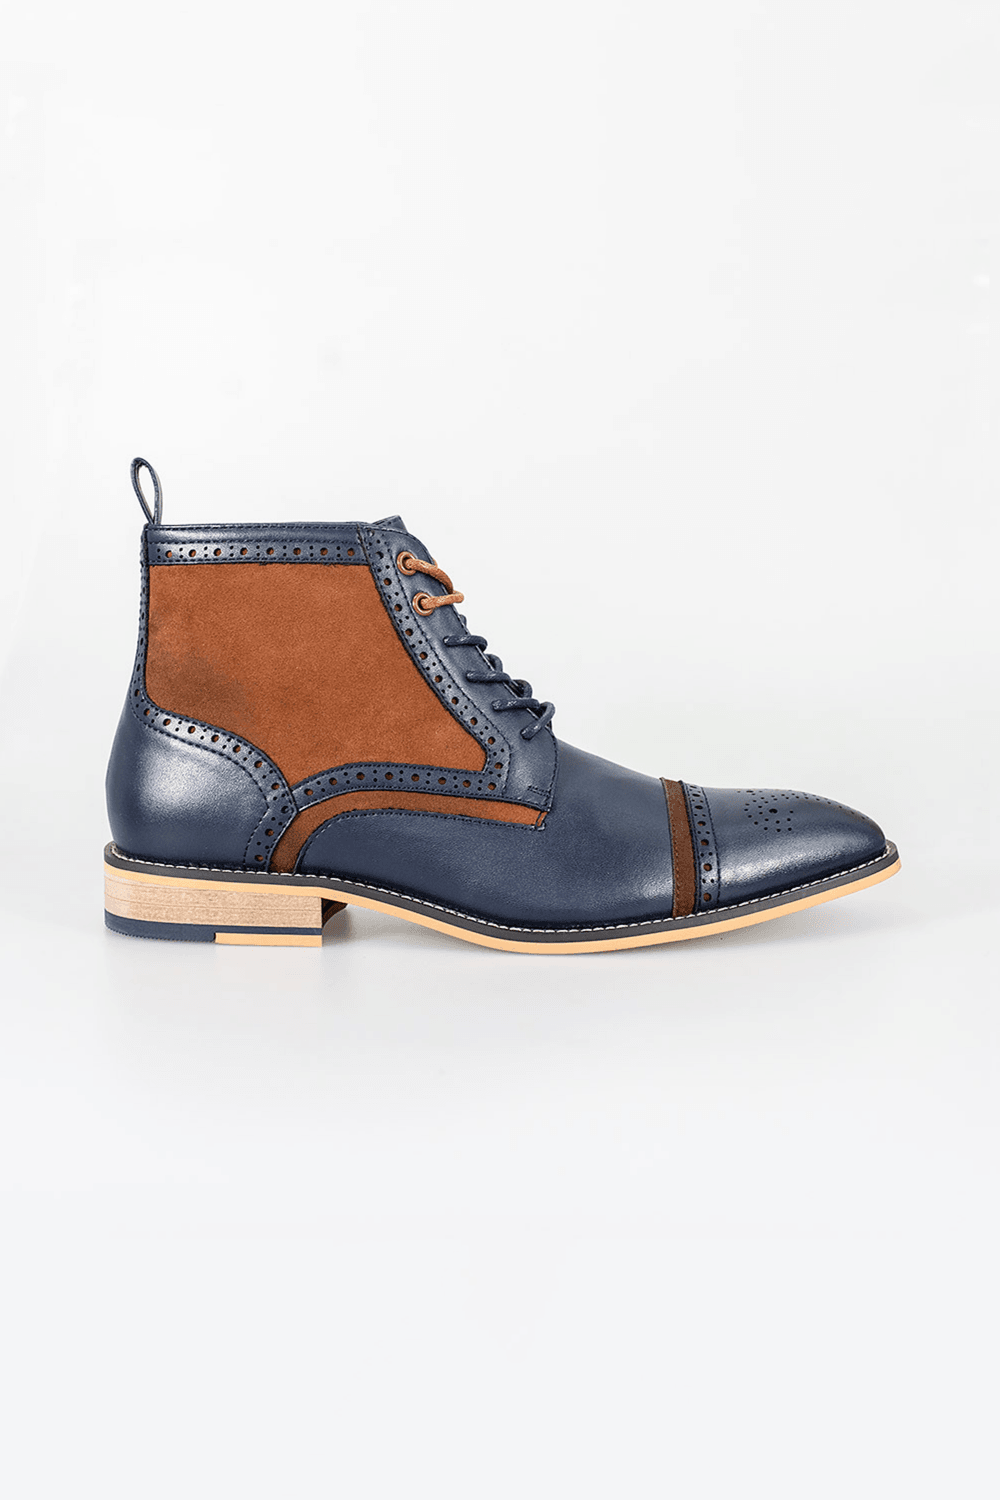 HOUSE OF CAVANI Modena NAVY LACE UP BOOTS